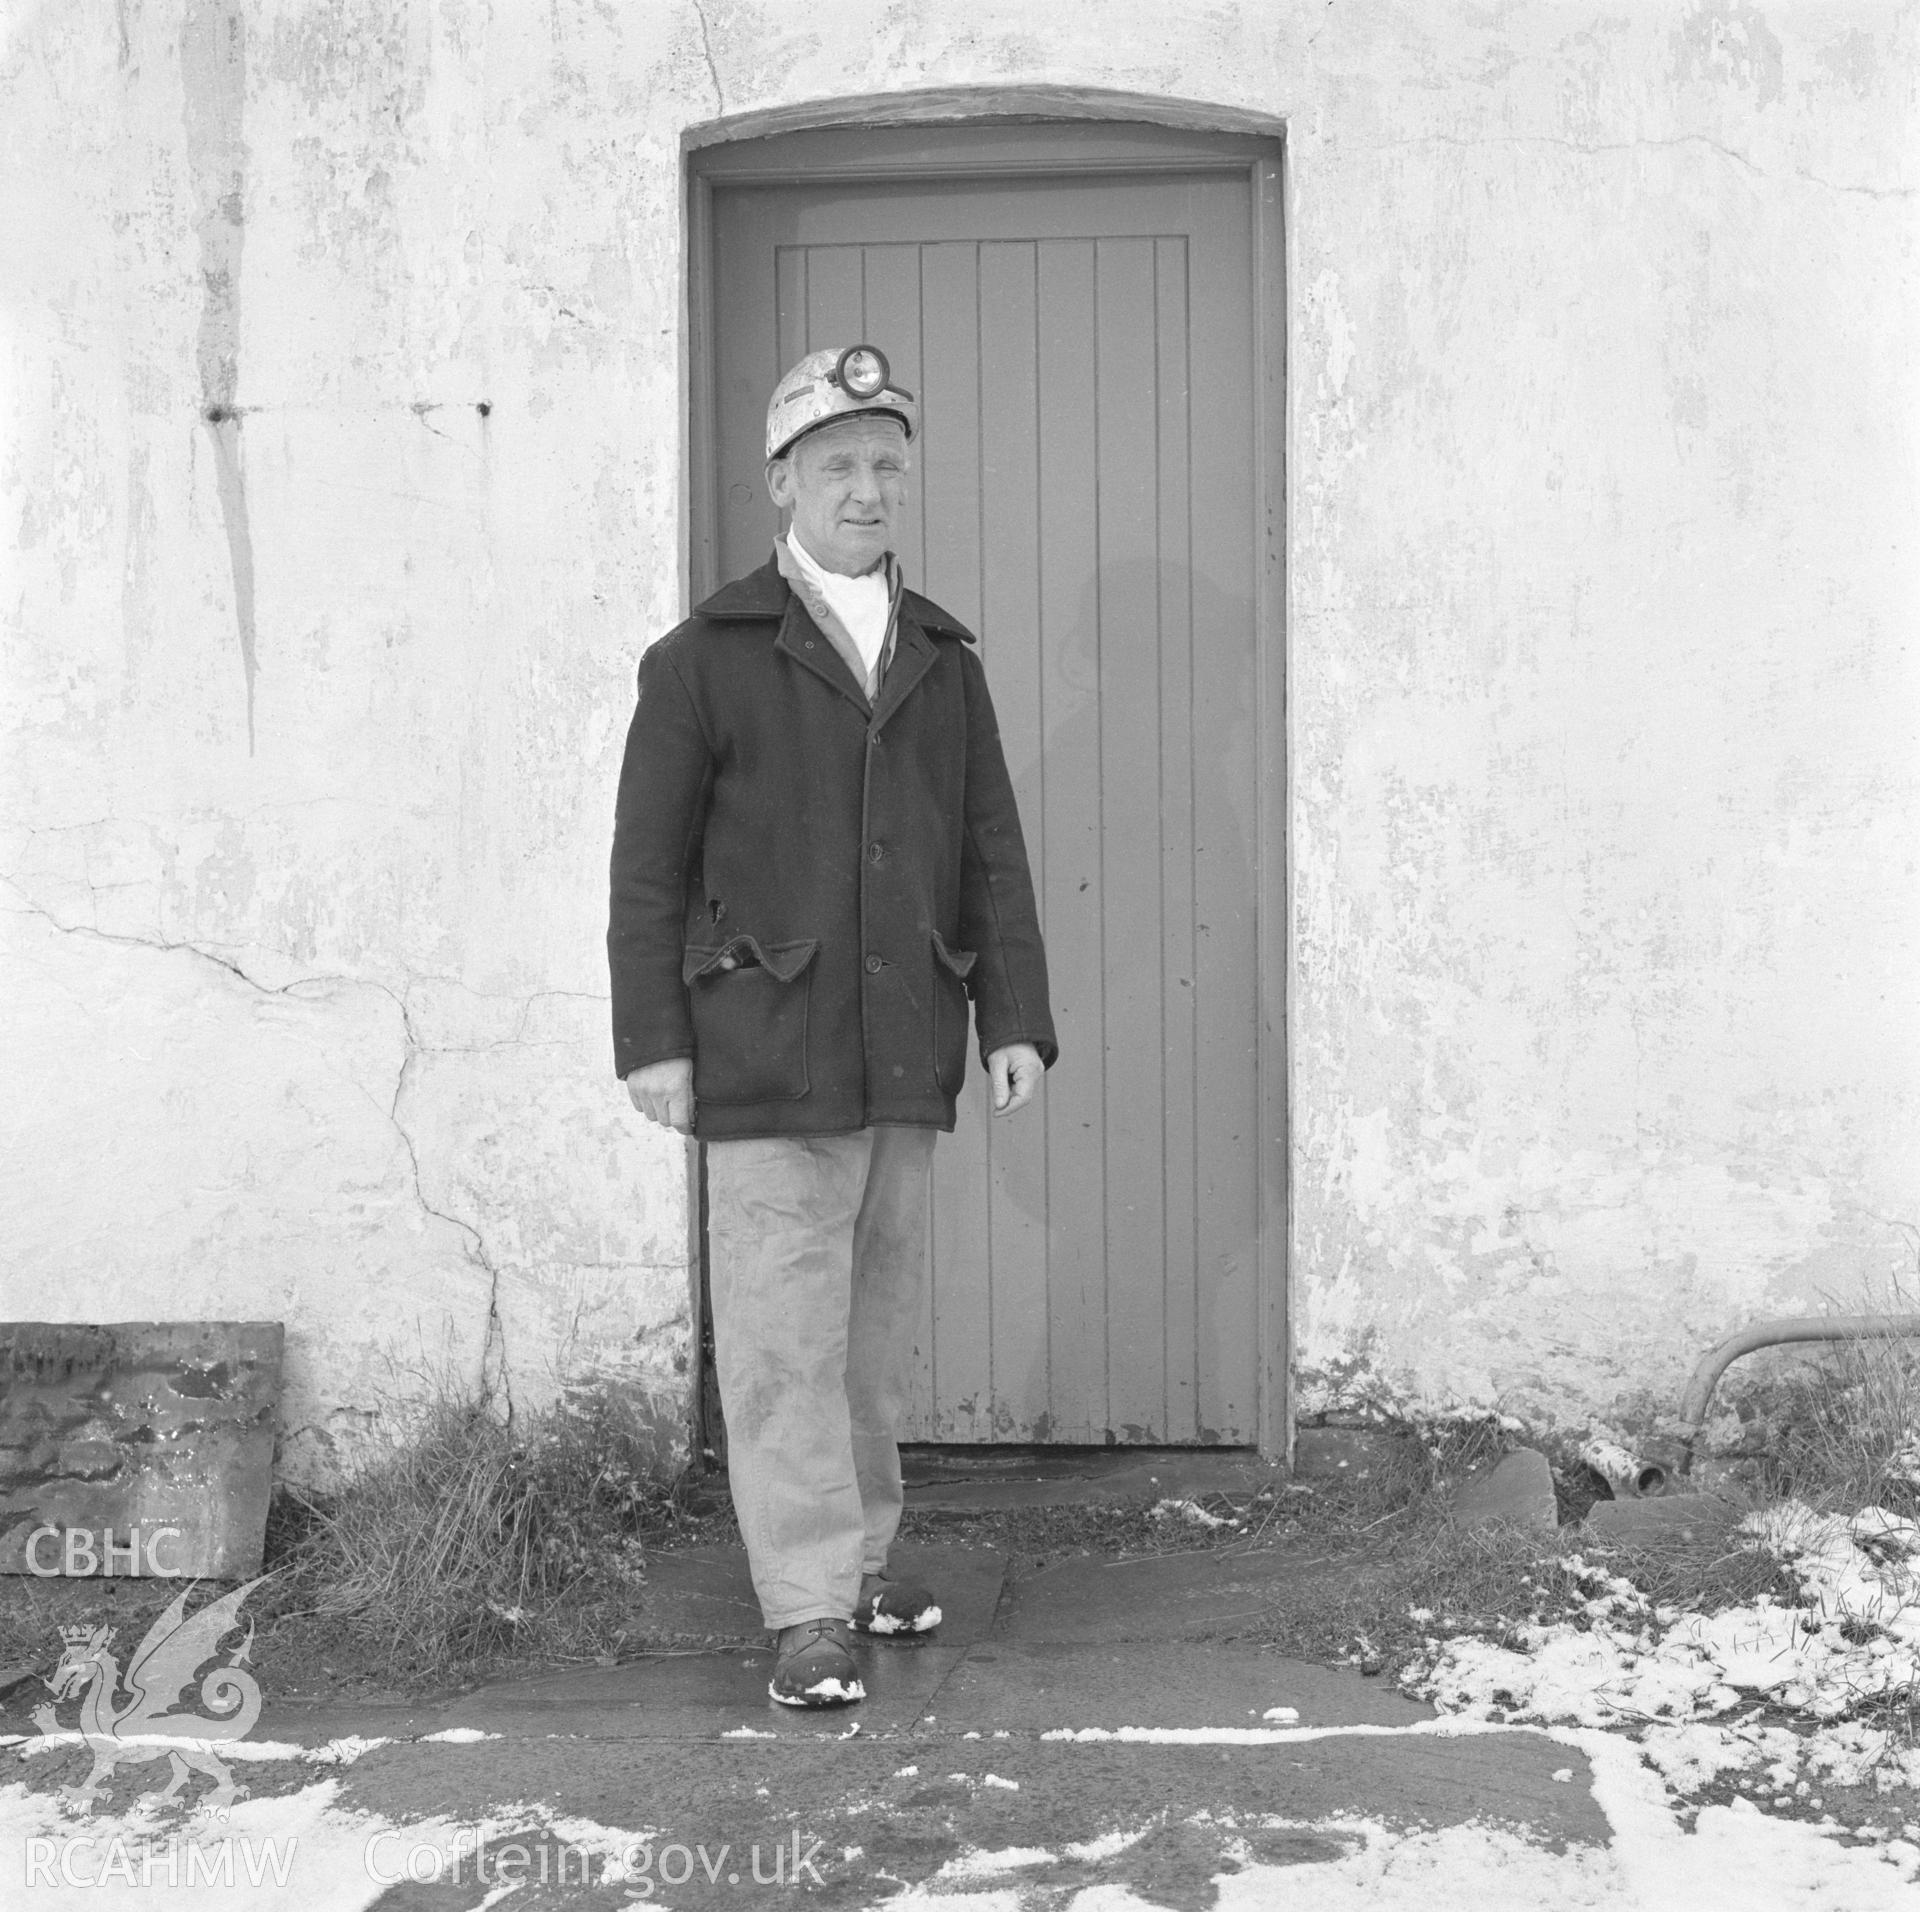 Digital copy of an acetate negative showing Glyn Morgan, last NCB manager at Big Pit, from the John Cornwell Collection.